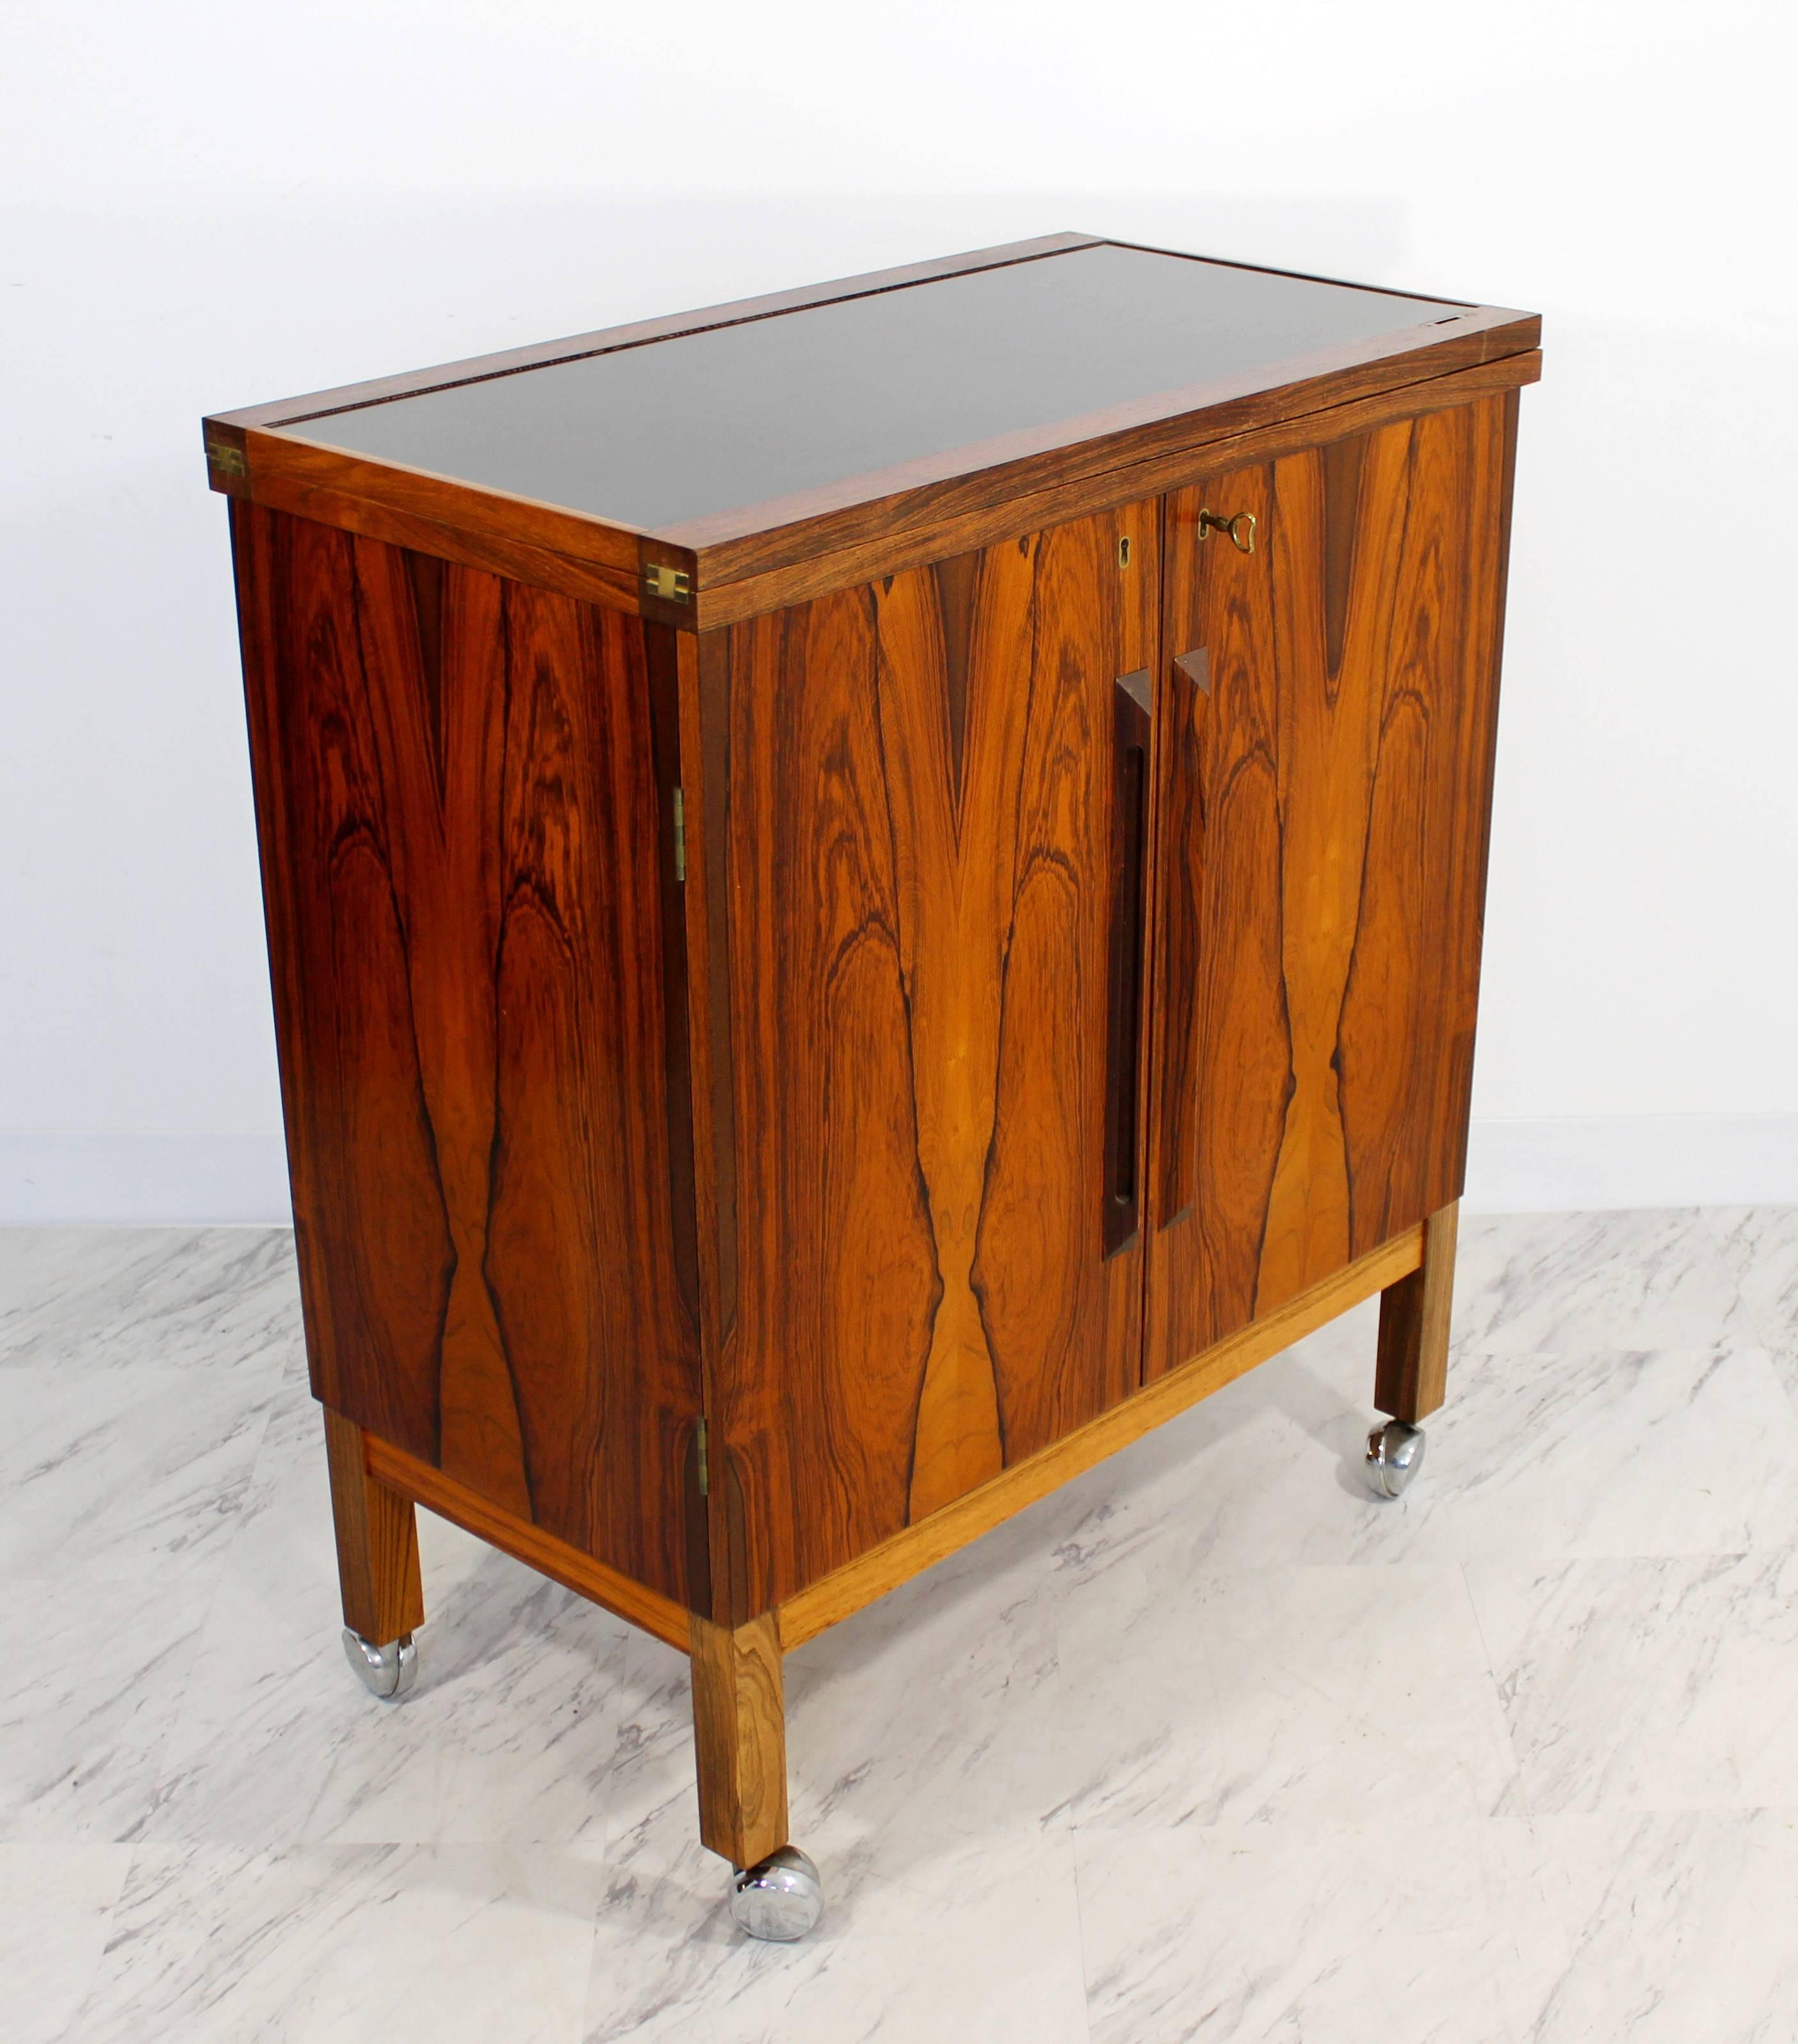 For your consideration is a fabulous, flip-top dry bar, made of rosewood, designed by Torbjørn Afdal for Bruksbo, Norway, circa 1960s. In excellent condition. The dimensions are 30